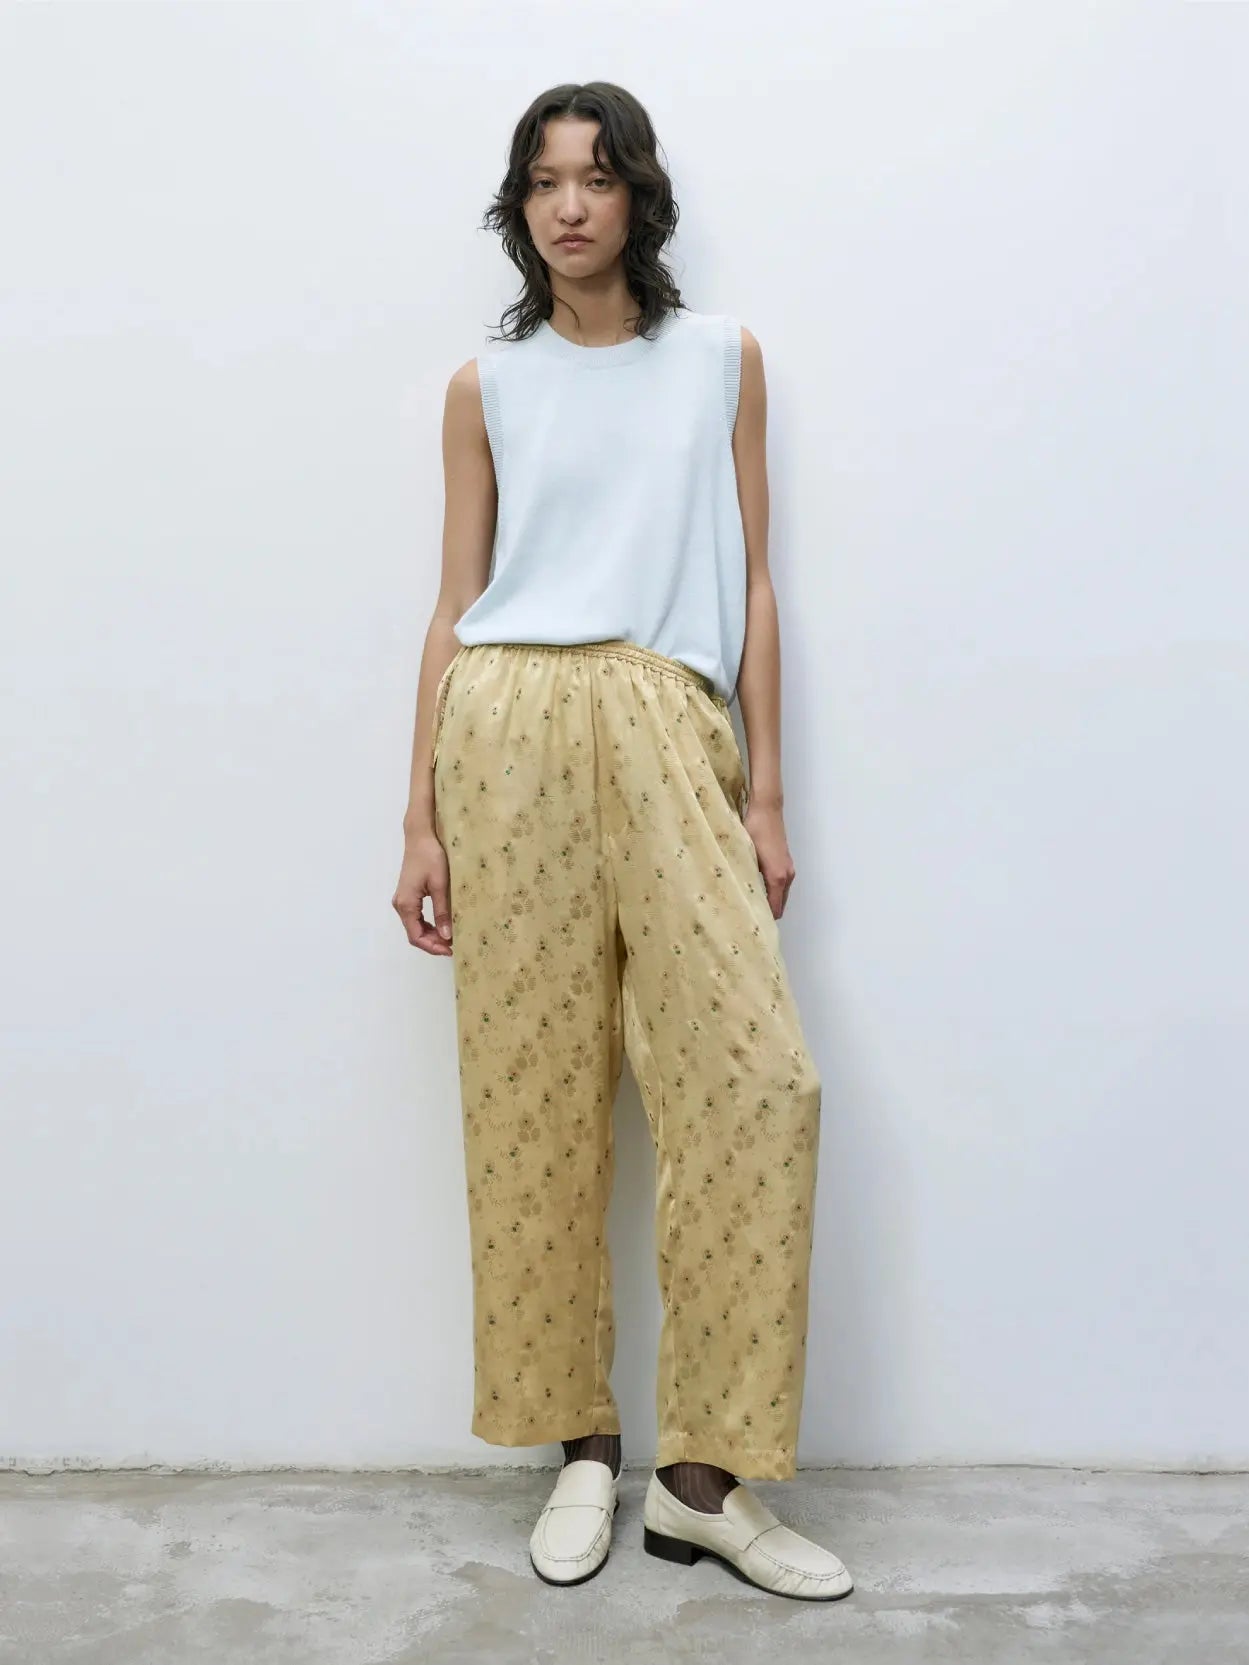 A person with shoulder-length wavy hair stands against a plain white wall in front of the Bassal store in Barcelona. They are wearing a sleeveless light blue top and Cordera's Silk Floral Pants Jojoba. They also have on white loafers. The flooring is gray.